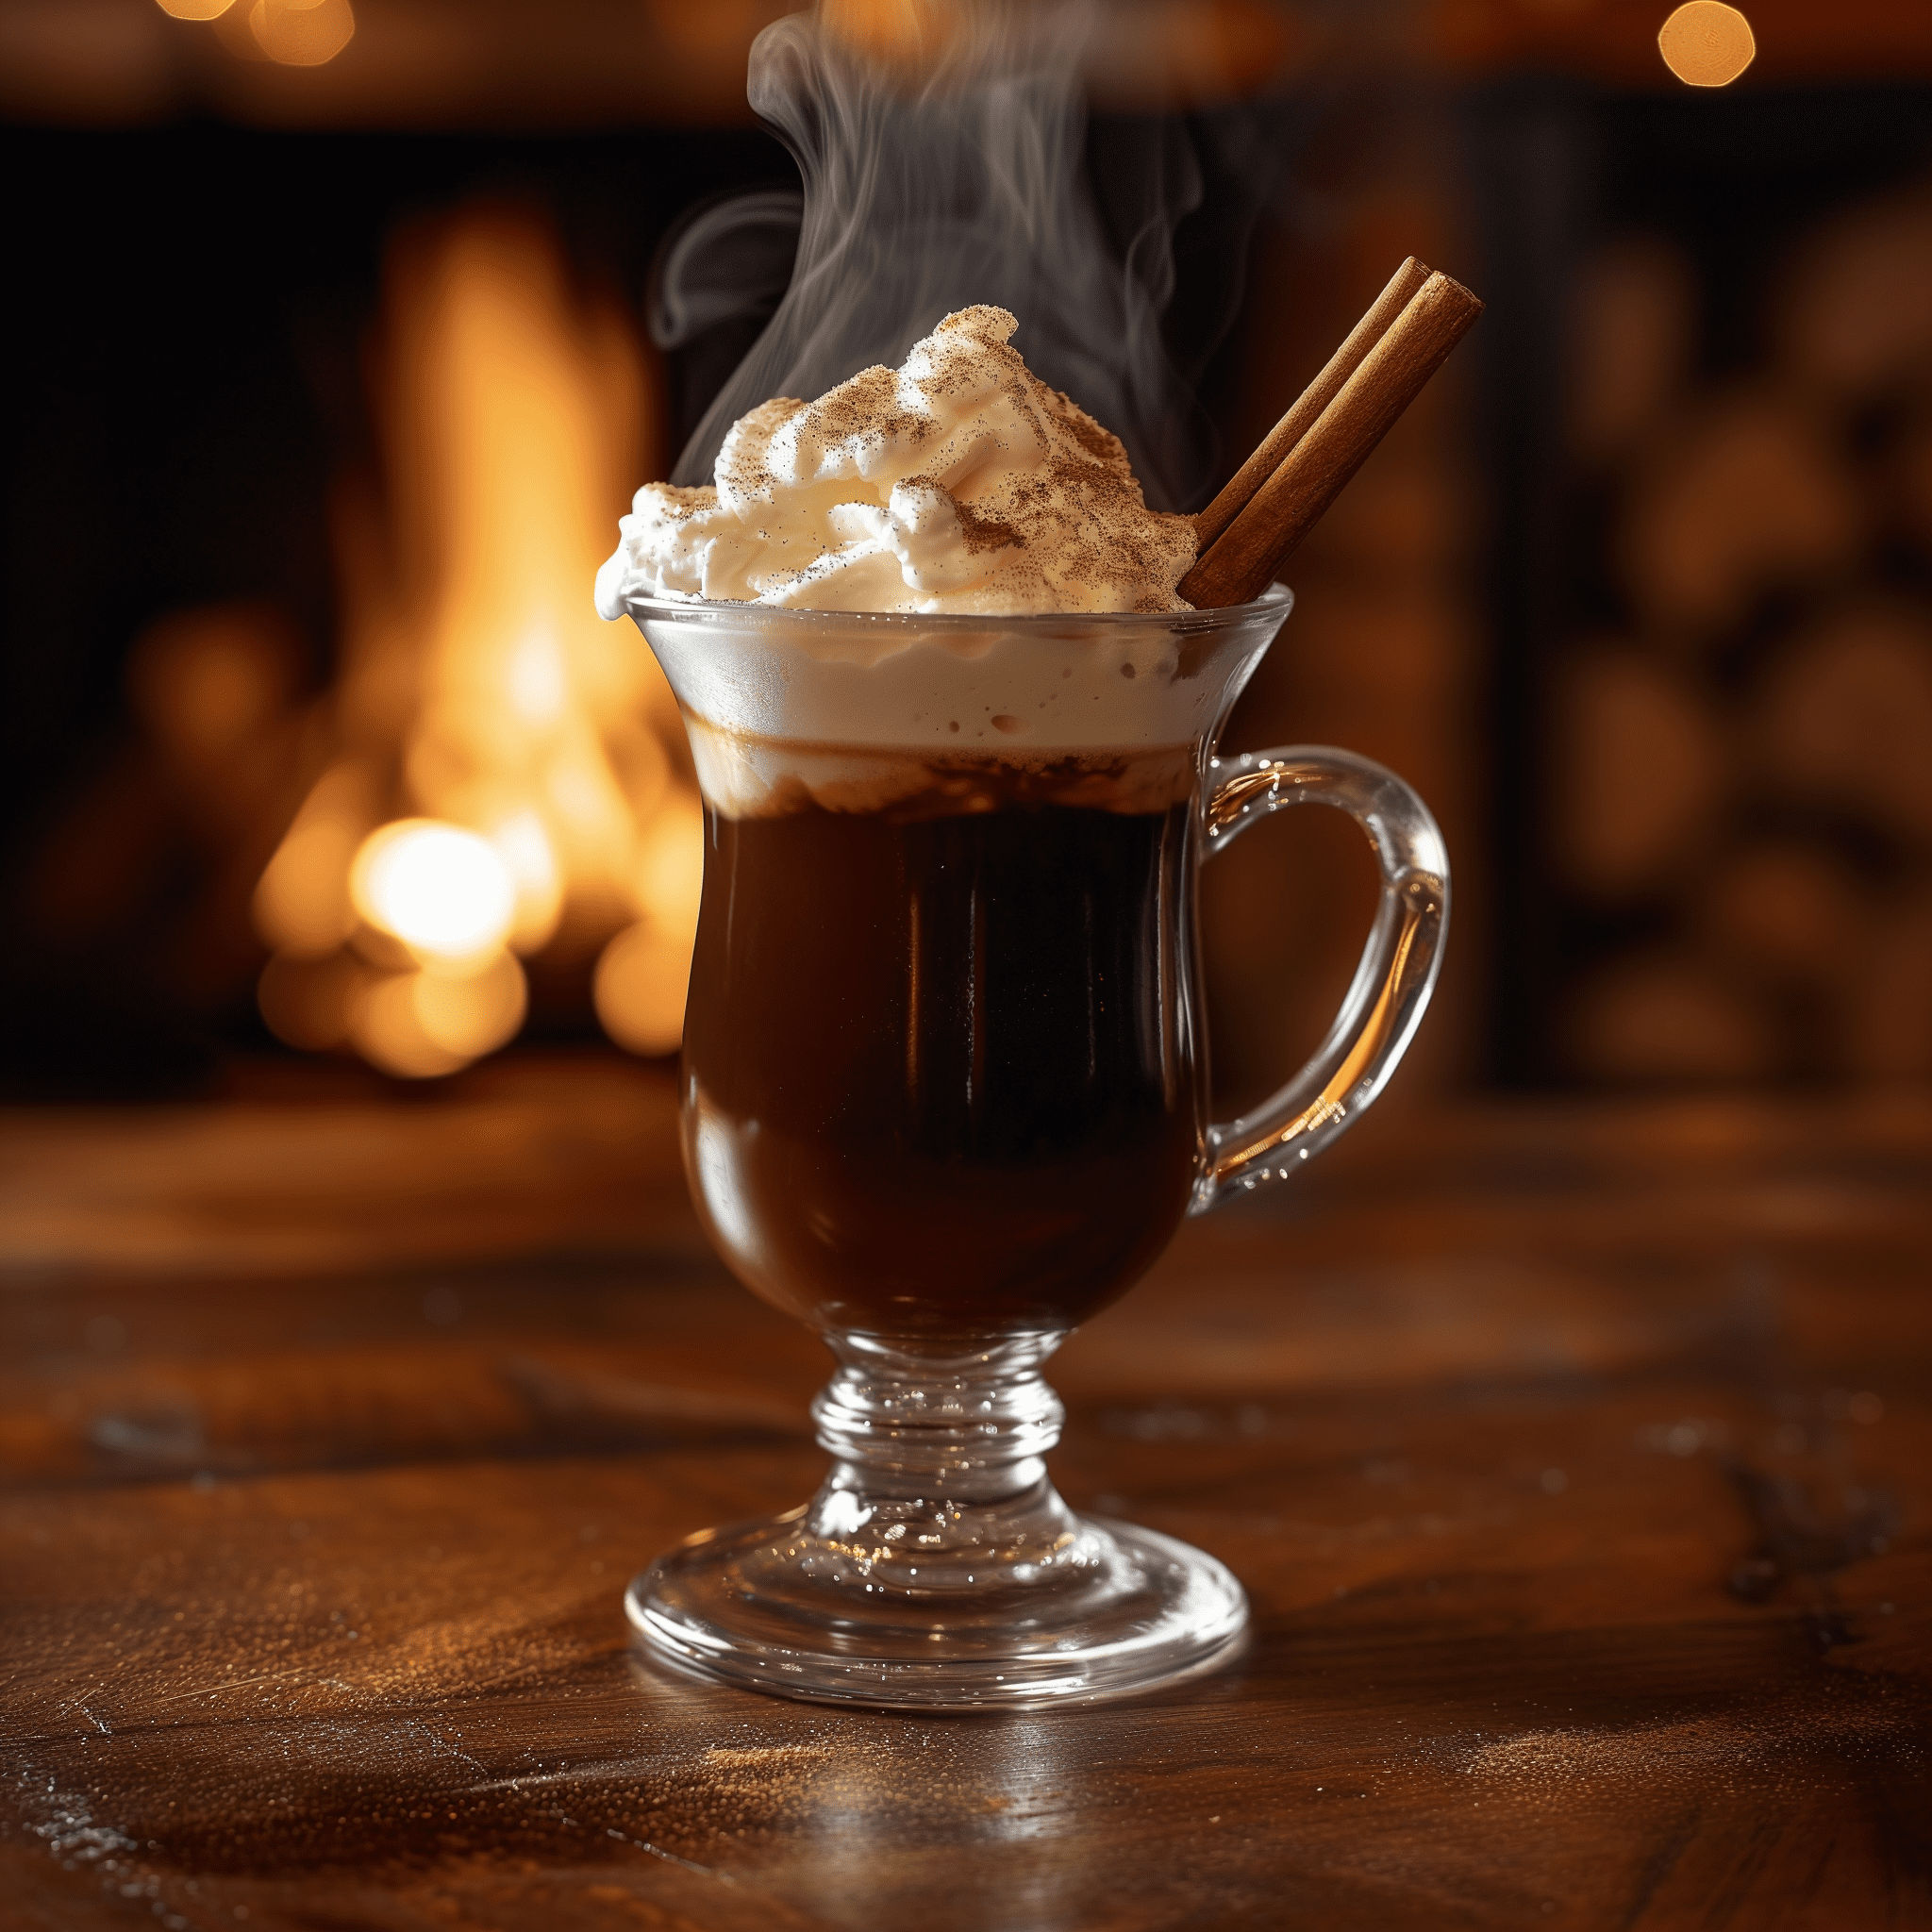 Holiday Hooch Cocktail Recipe - The Holiday Hooch is a rich and indulgent treat. It's sweet with a prominent gingerbread flavor that's perfectly complemented by the robustness of the coffee. The moonshine adds a smooth, yet potent kick, making it a strong and warming beverage.